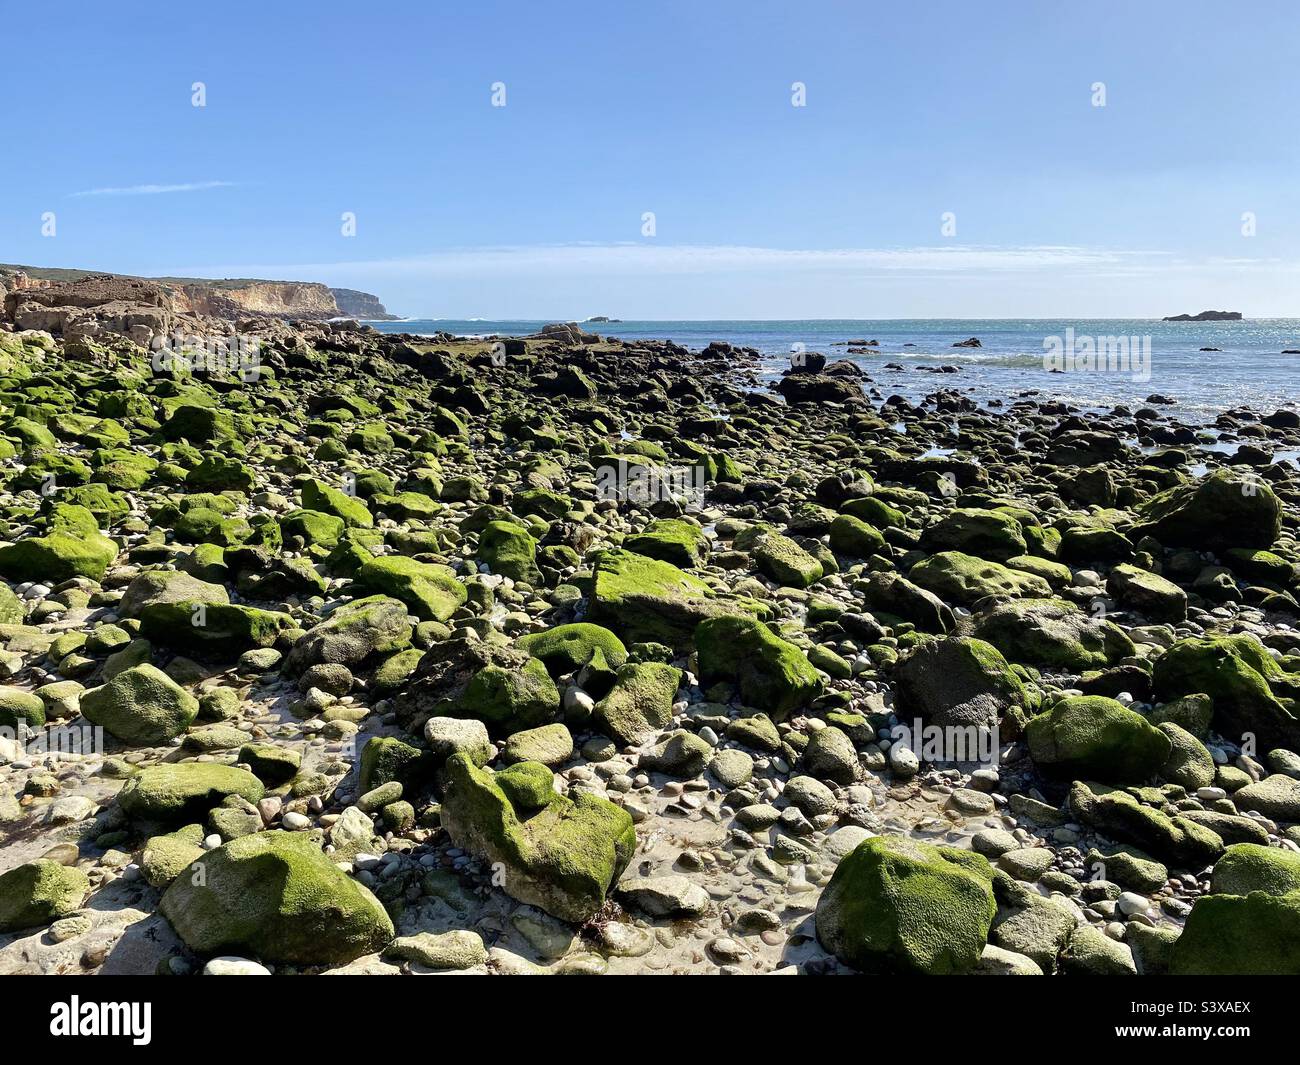 Green algae covered rocks on a beach at low tide Stock Photo